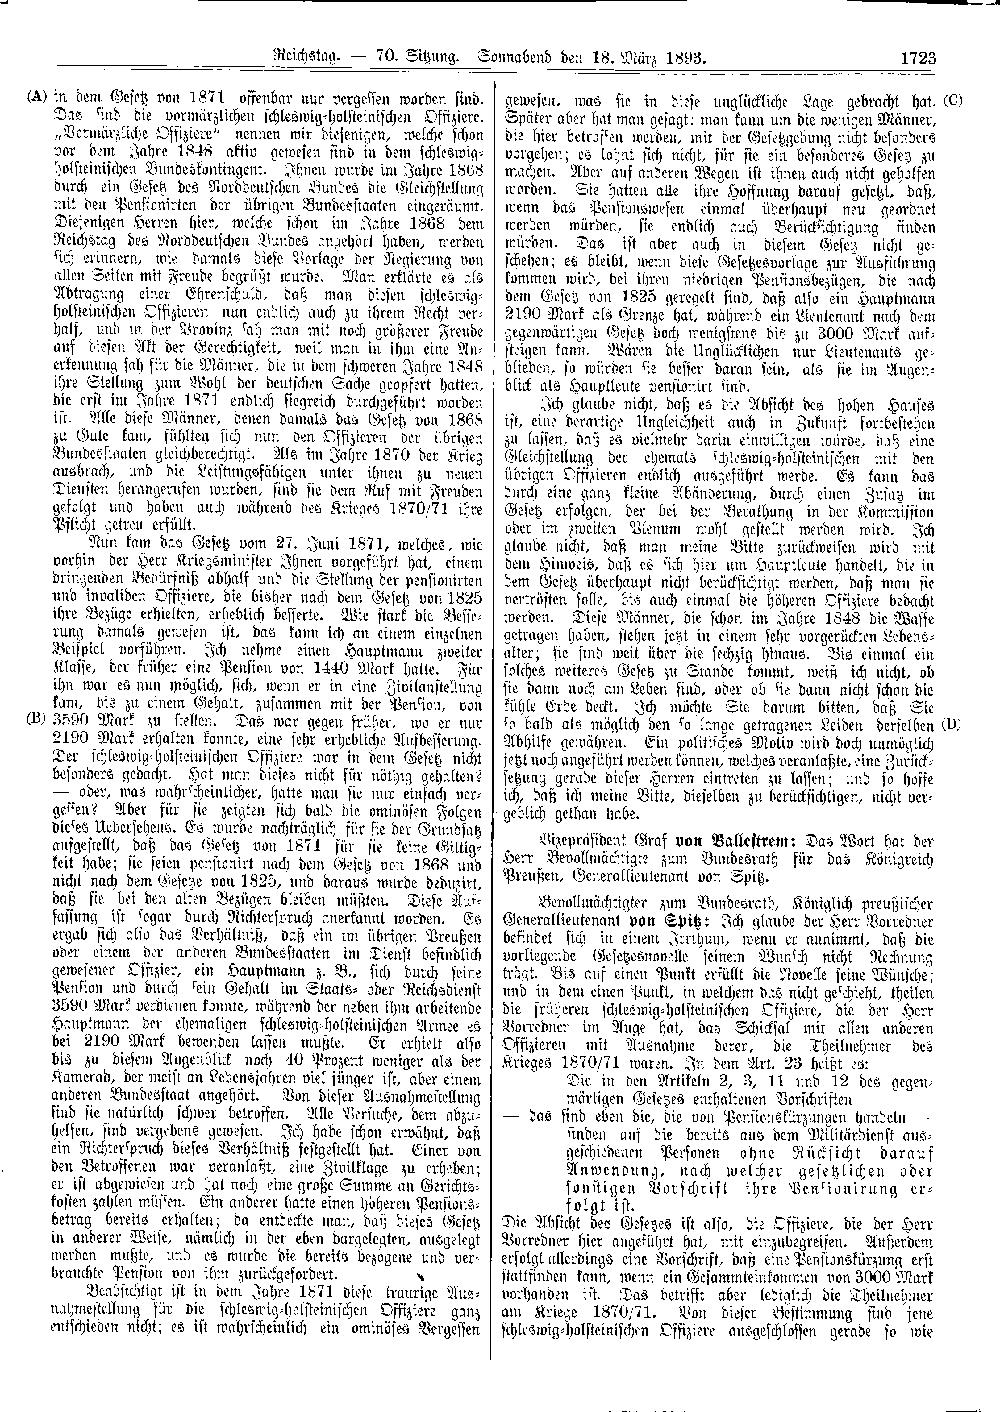 Scan of page 1723